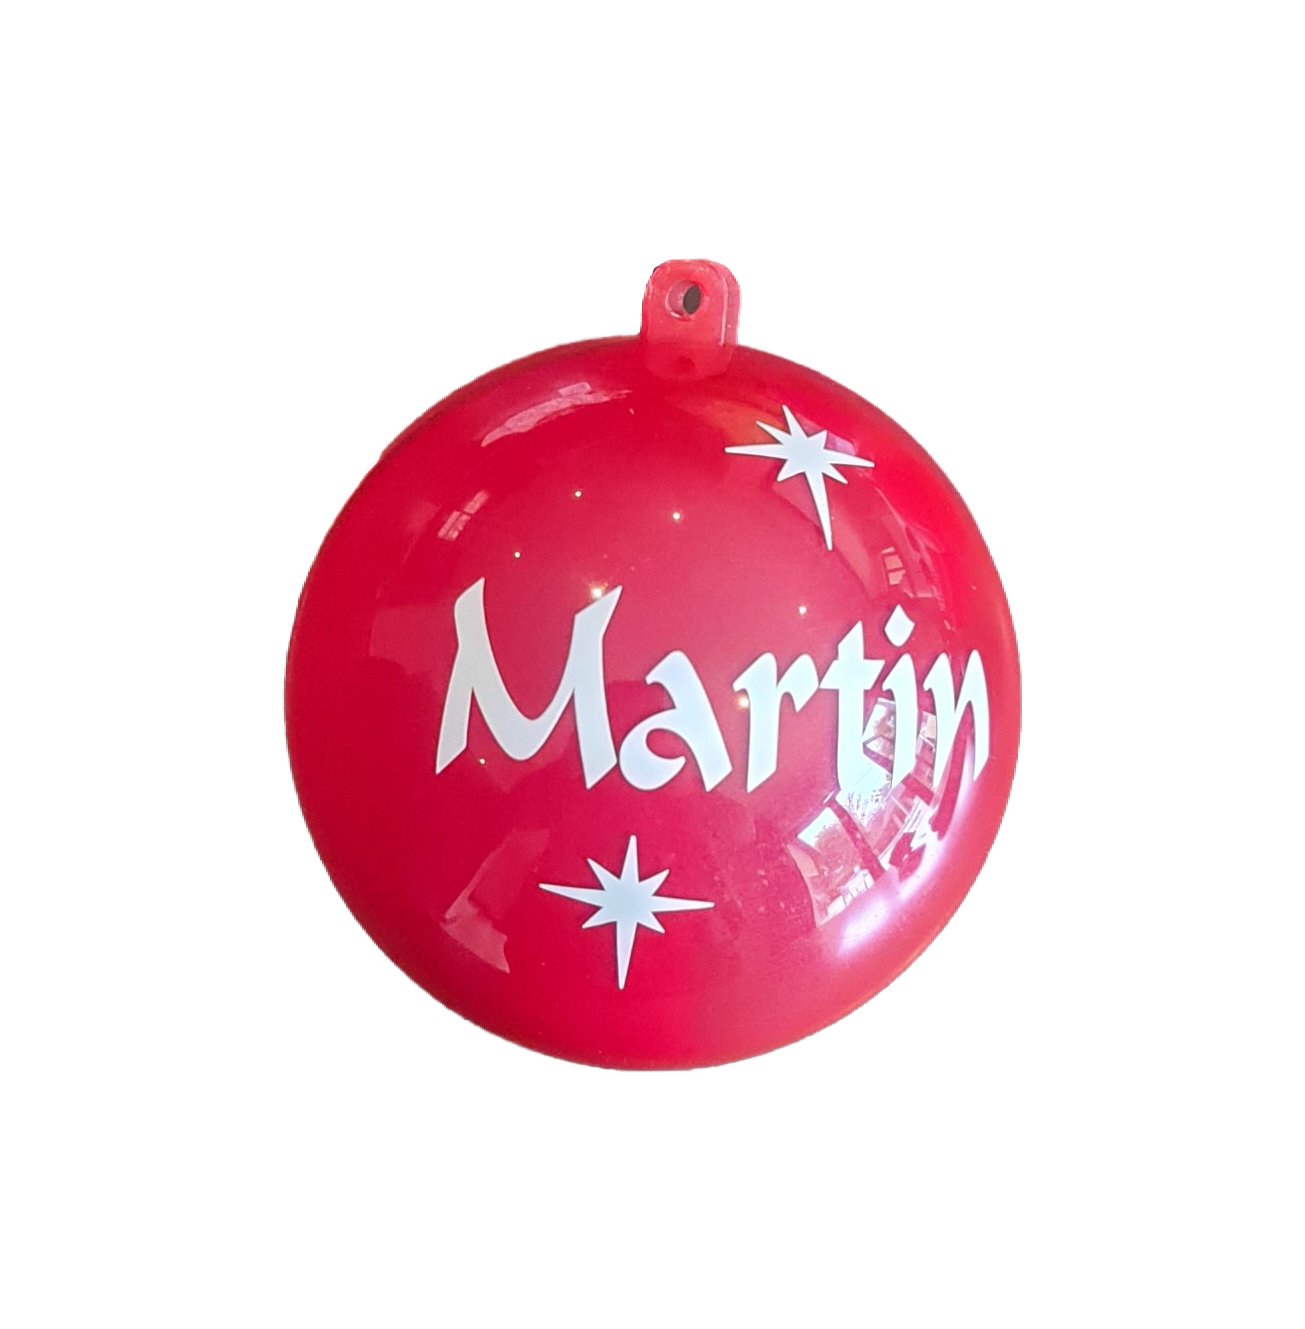 80mm red personalised gift bauble. Christmas or special occasions